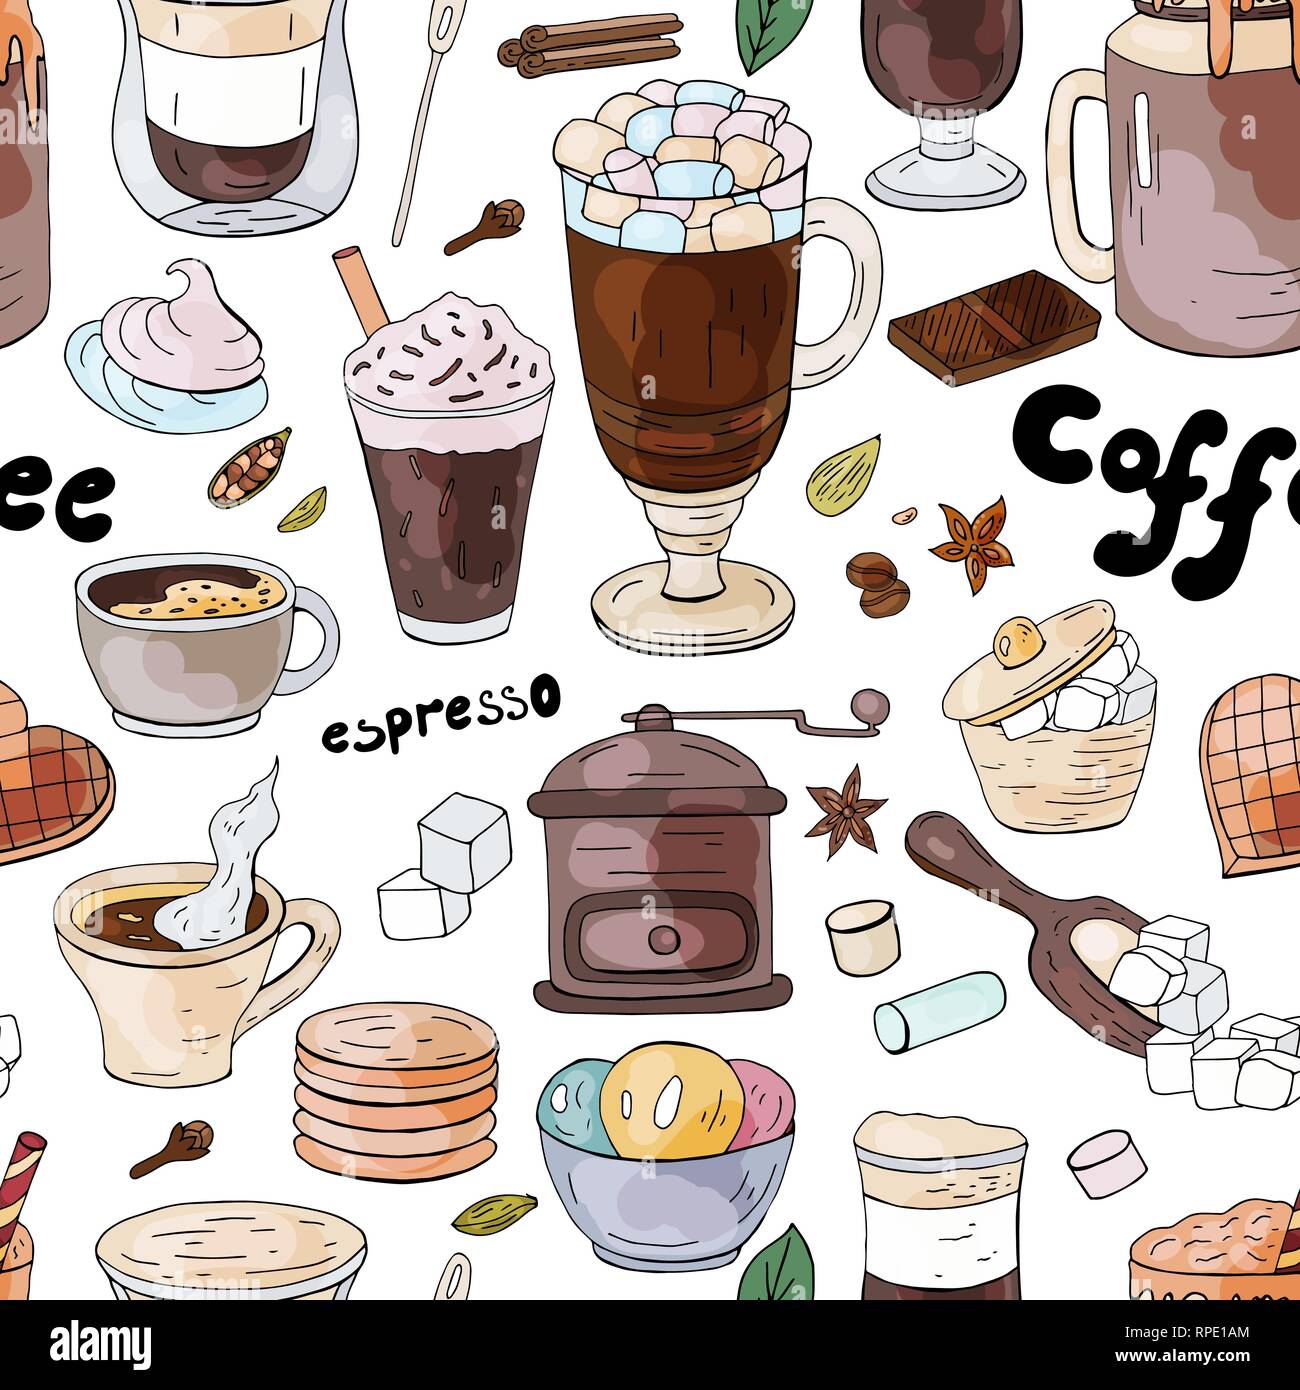 Morning coffee. Different drinks balance, espresso, americano, cappuccino  and latte. Boho style cups and mugs and liquid banners, cafe or bakery  Stock Vector Image & Art - Alamy